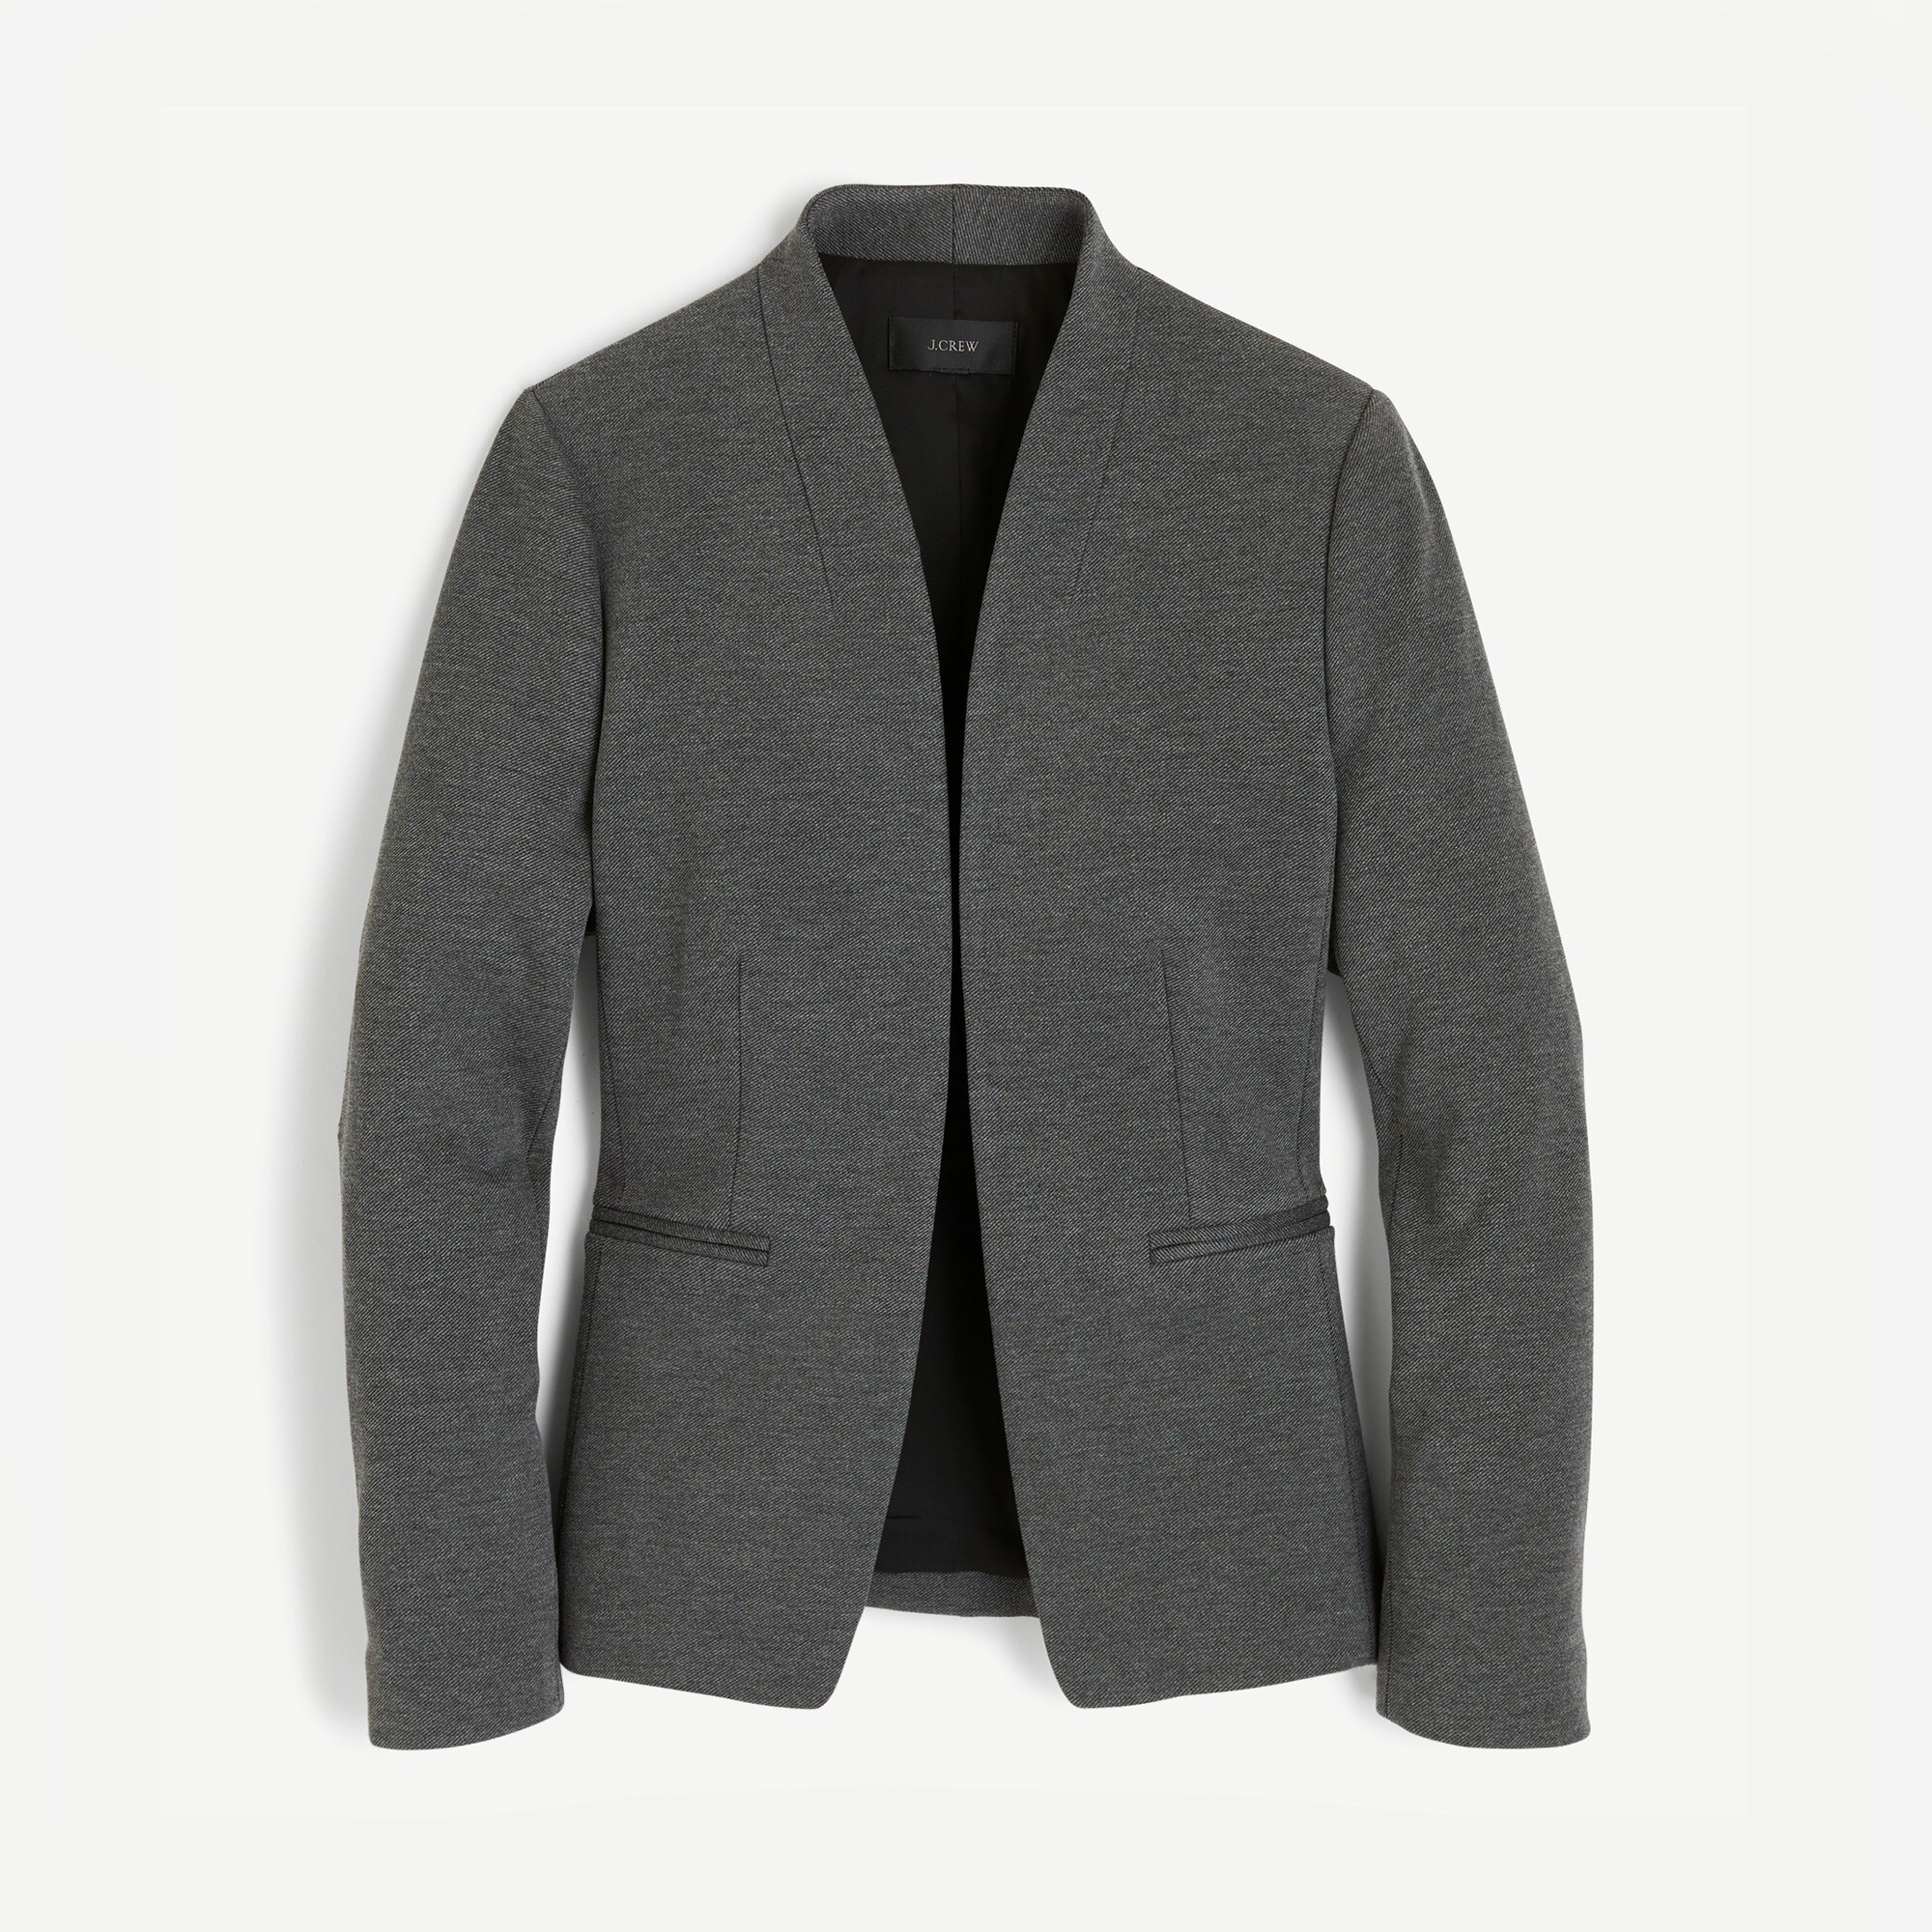  Going-out blazer in stretch twill